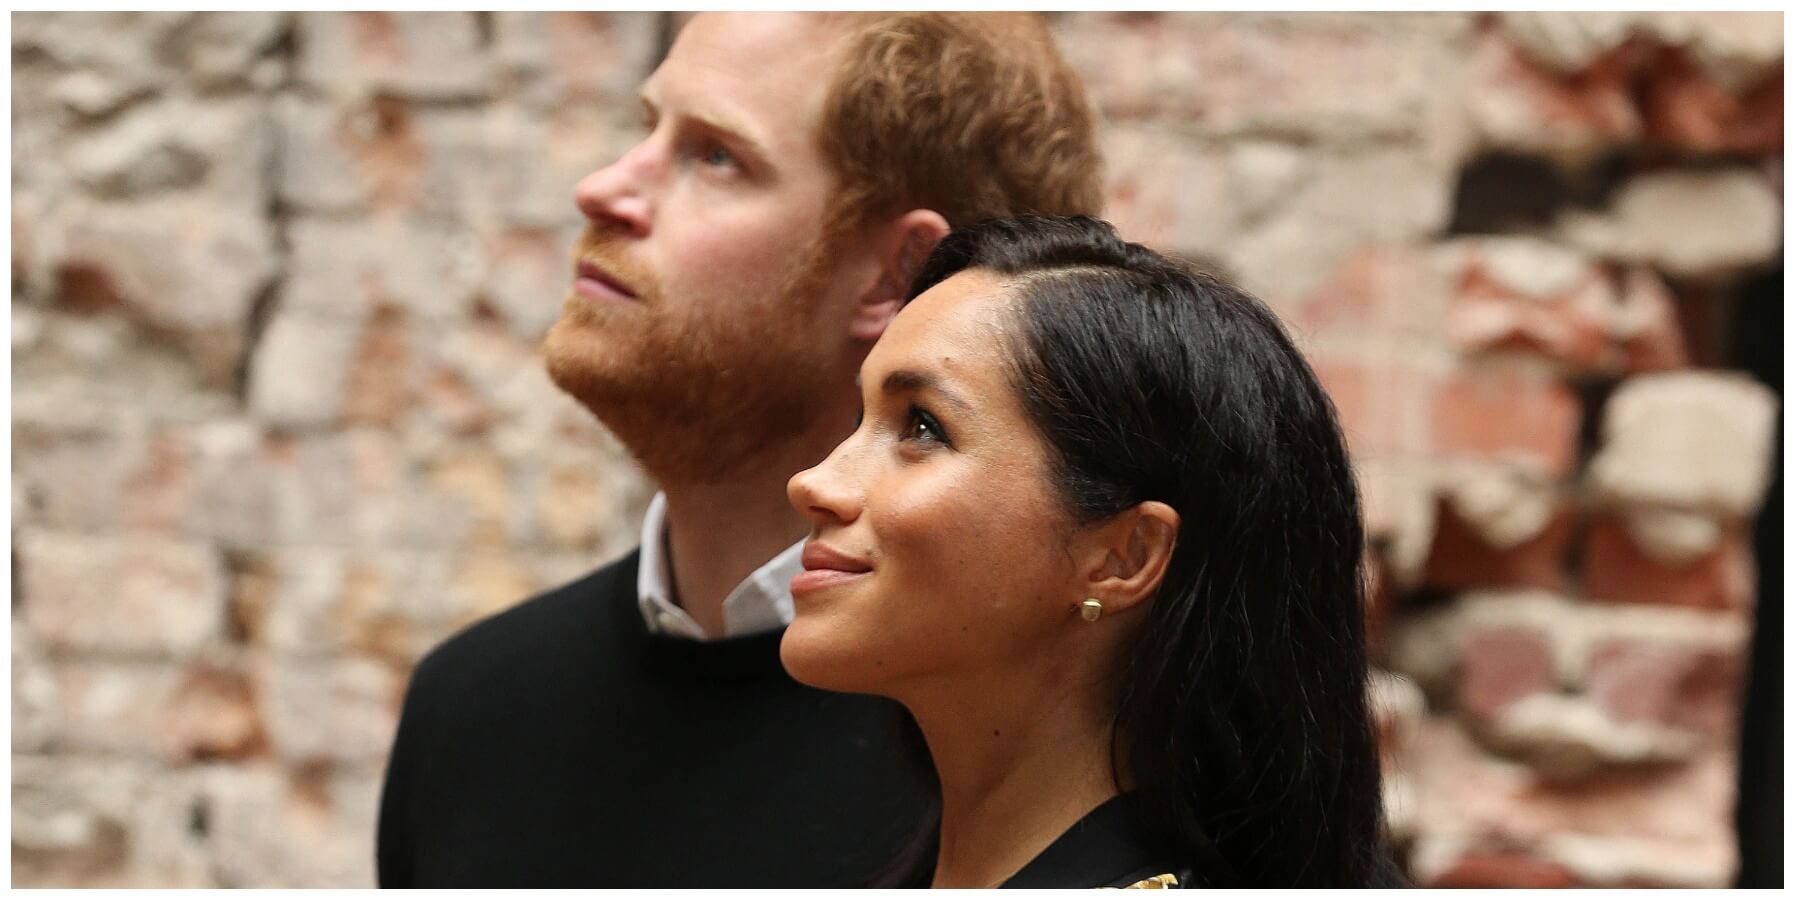 Meghan Markle and Prince Harry photographed in 2019 at Bristol Old Vic theatre.